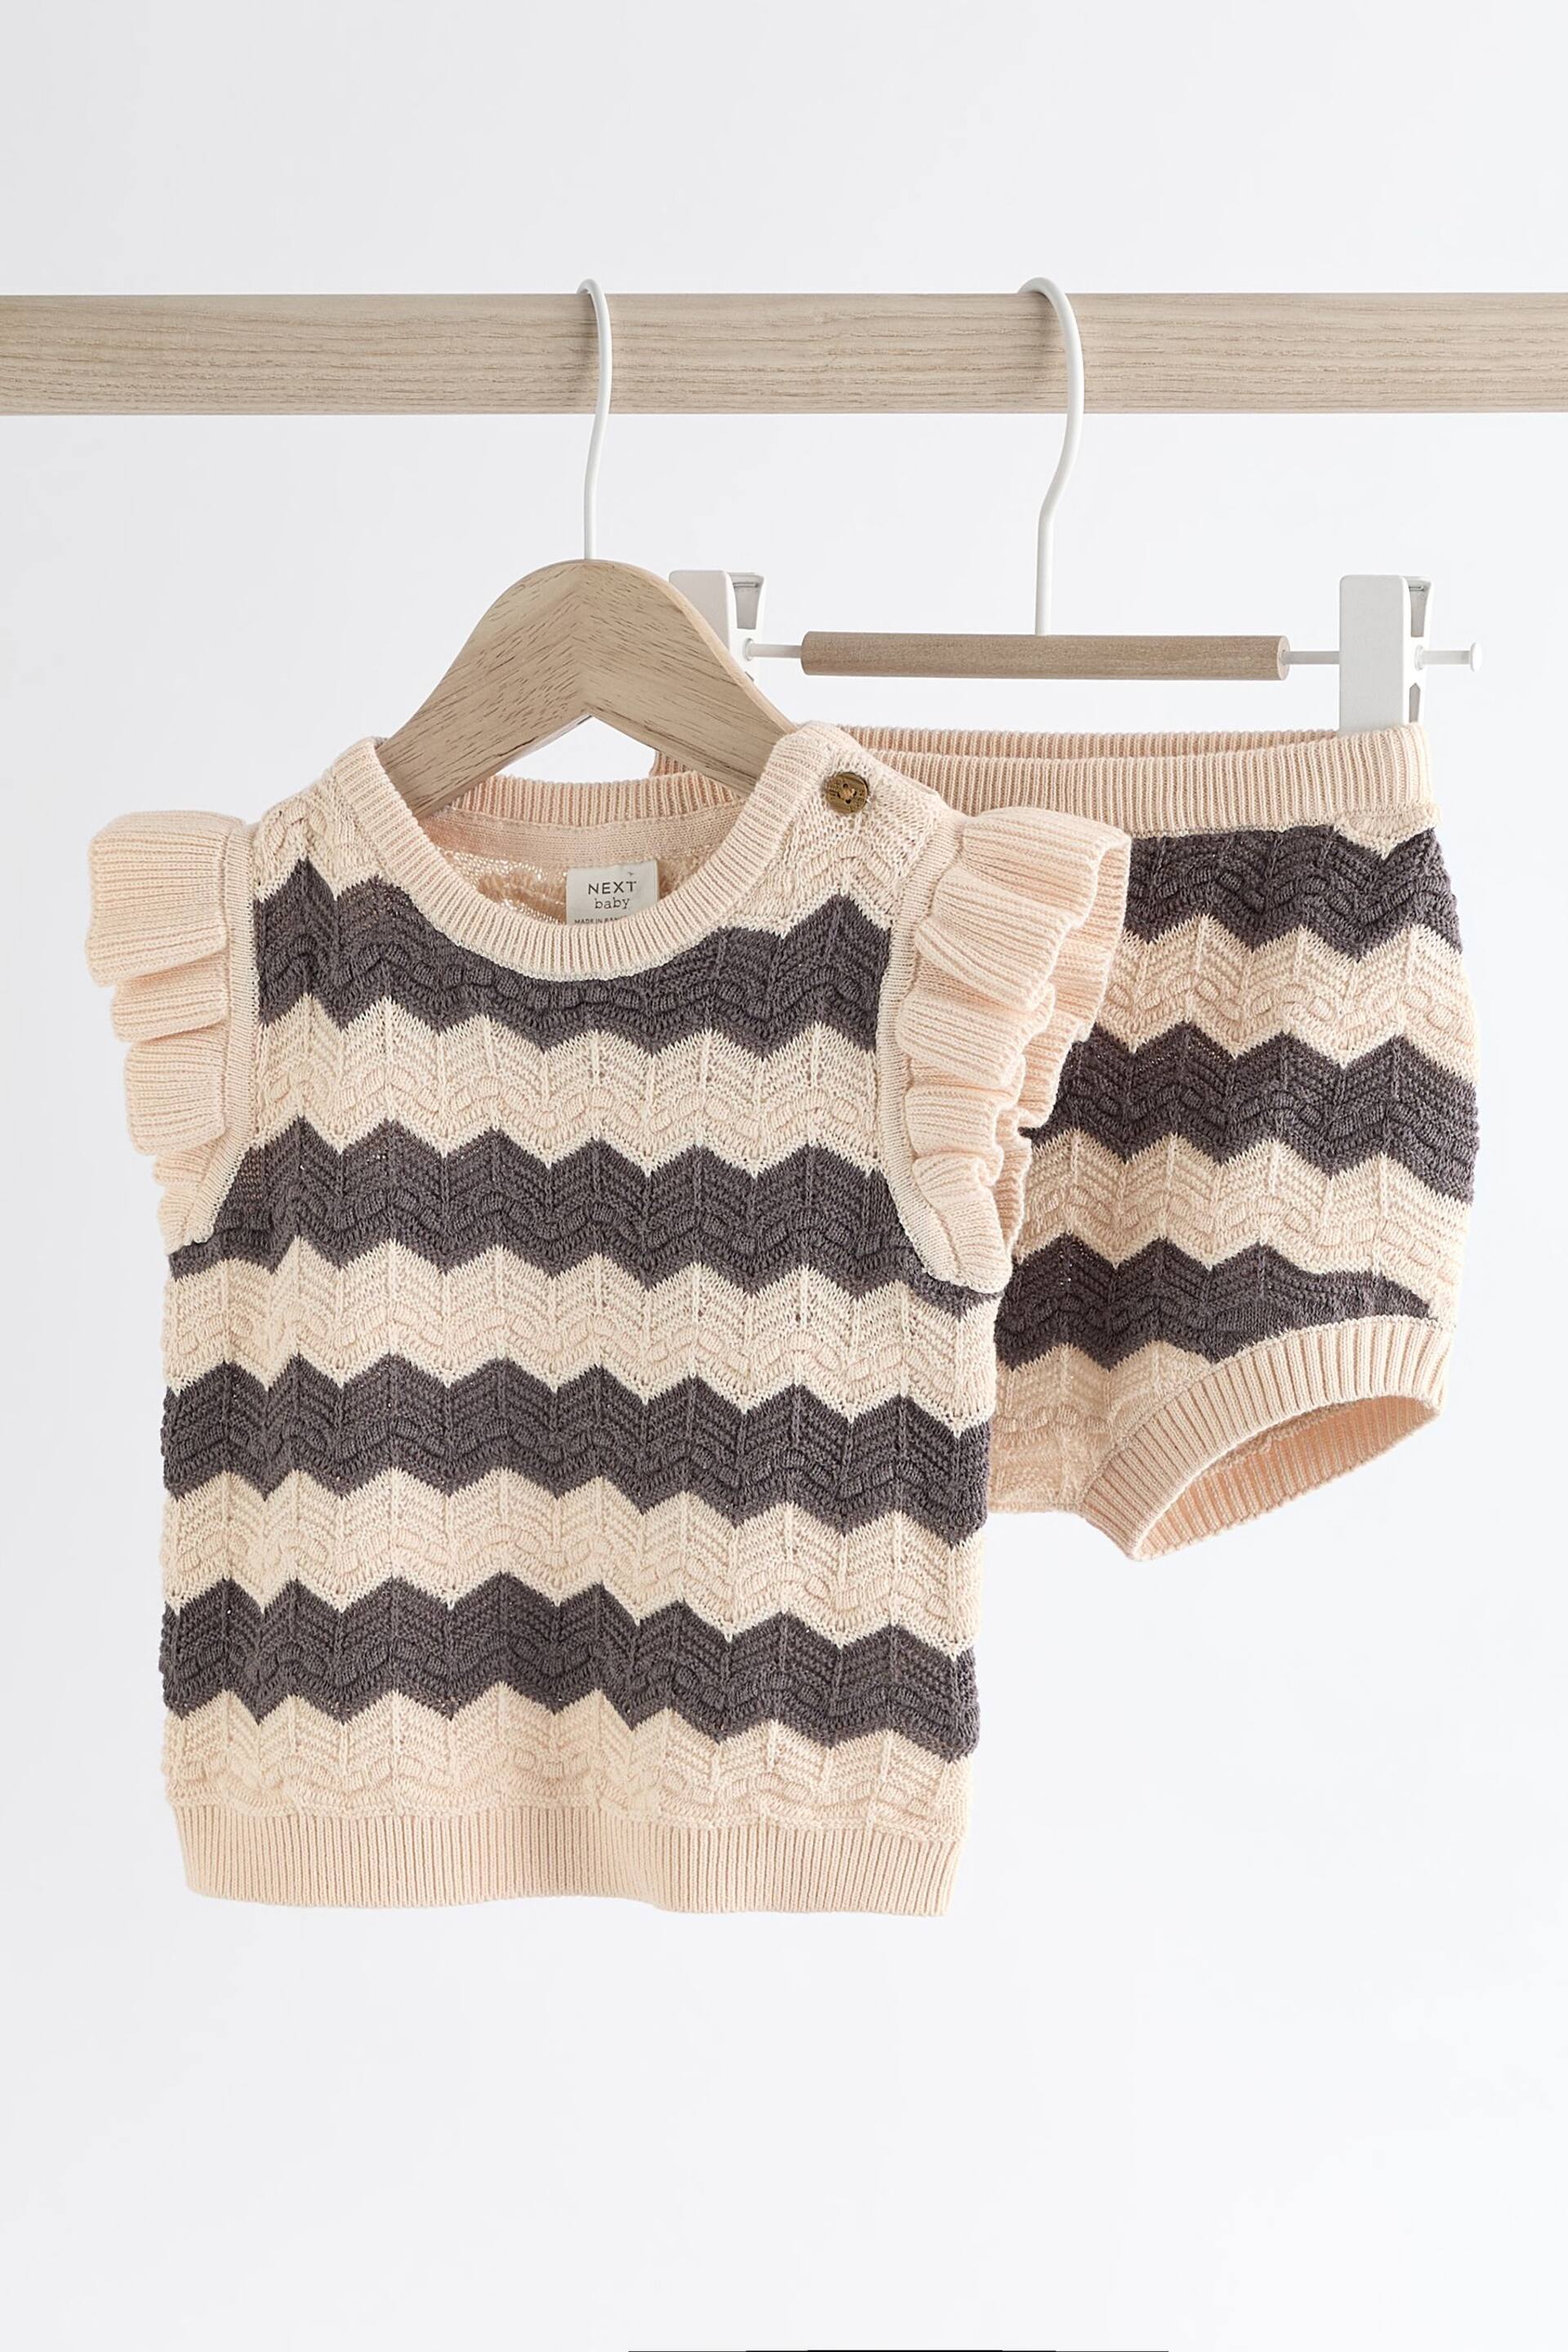 Tan/ Monochrome Zig Zag Stripe Baby Knitted Crochet Top And Shorts Set (0mths-2yrs) - Image 1 of 9